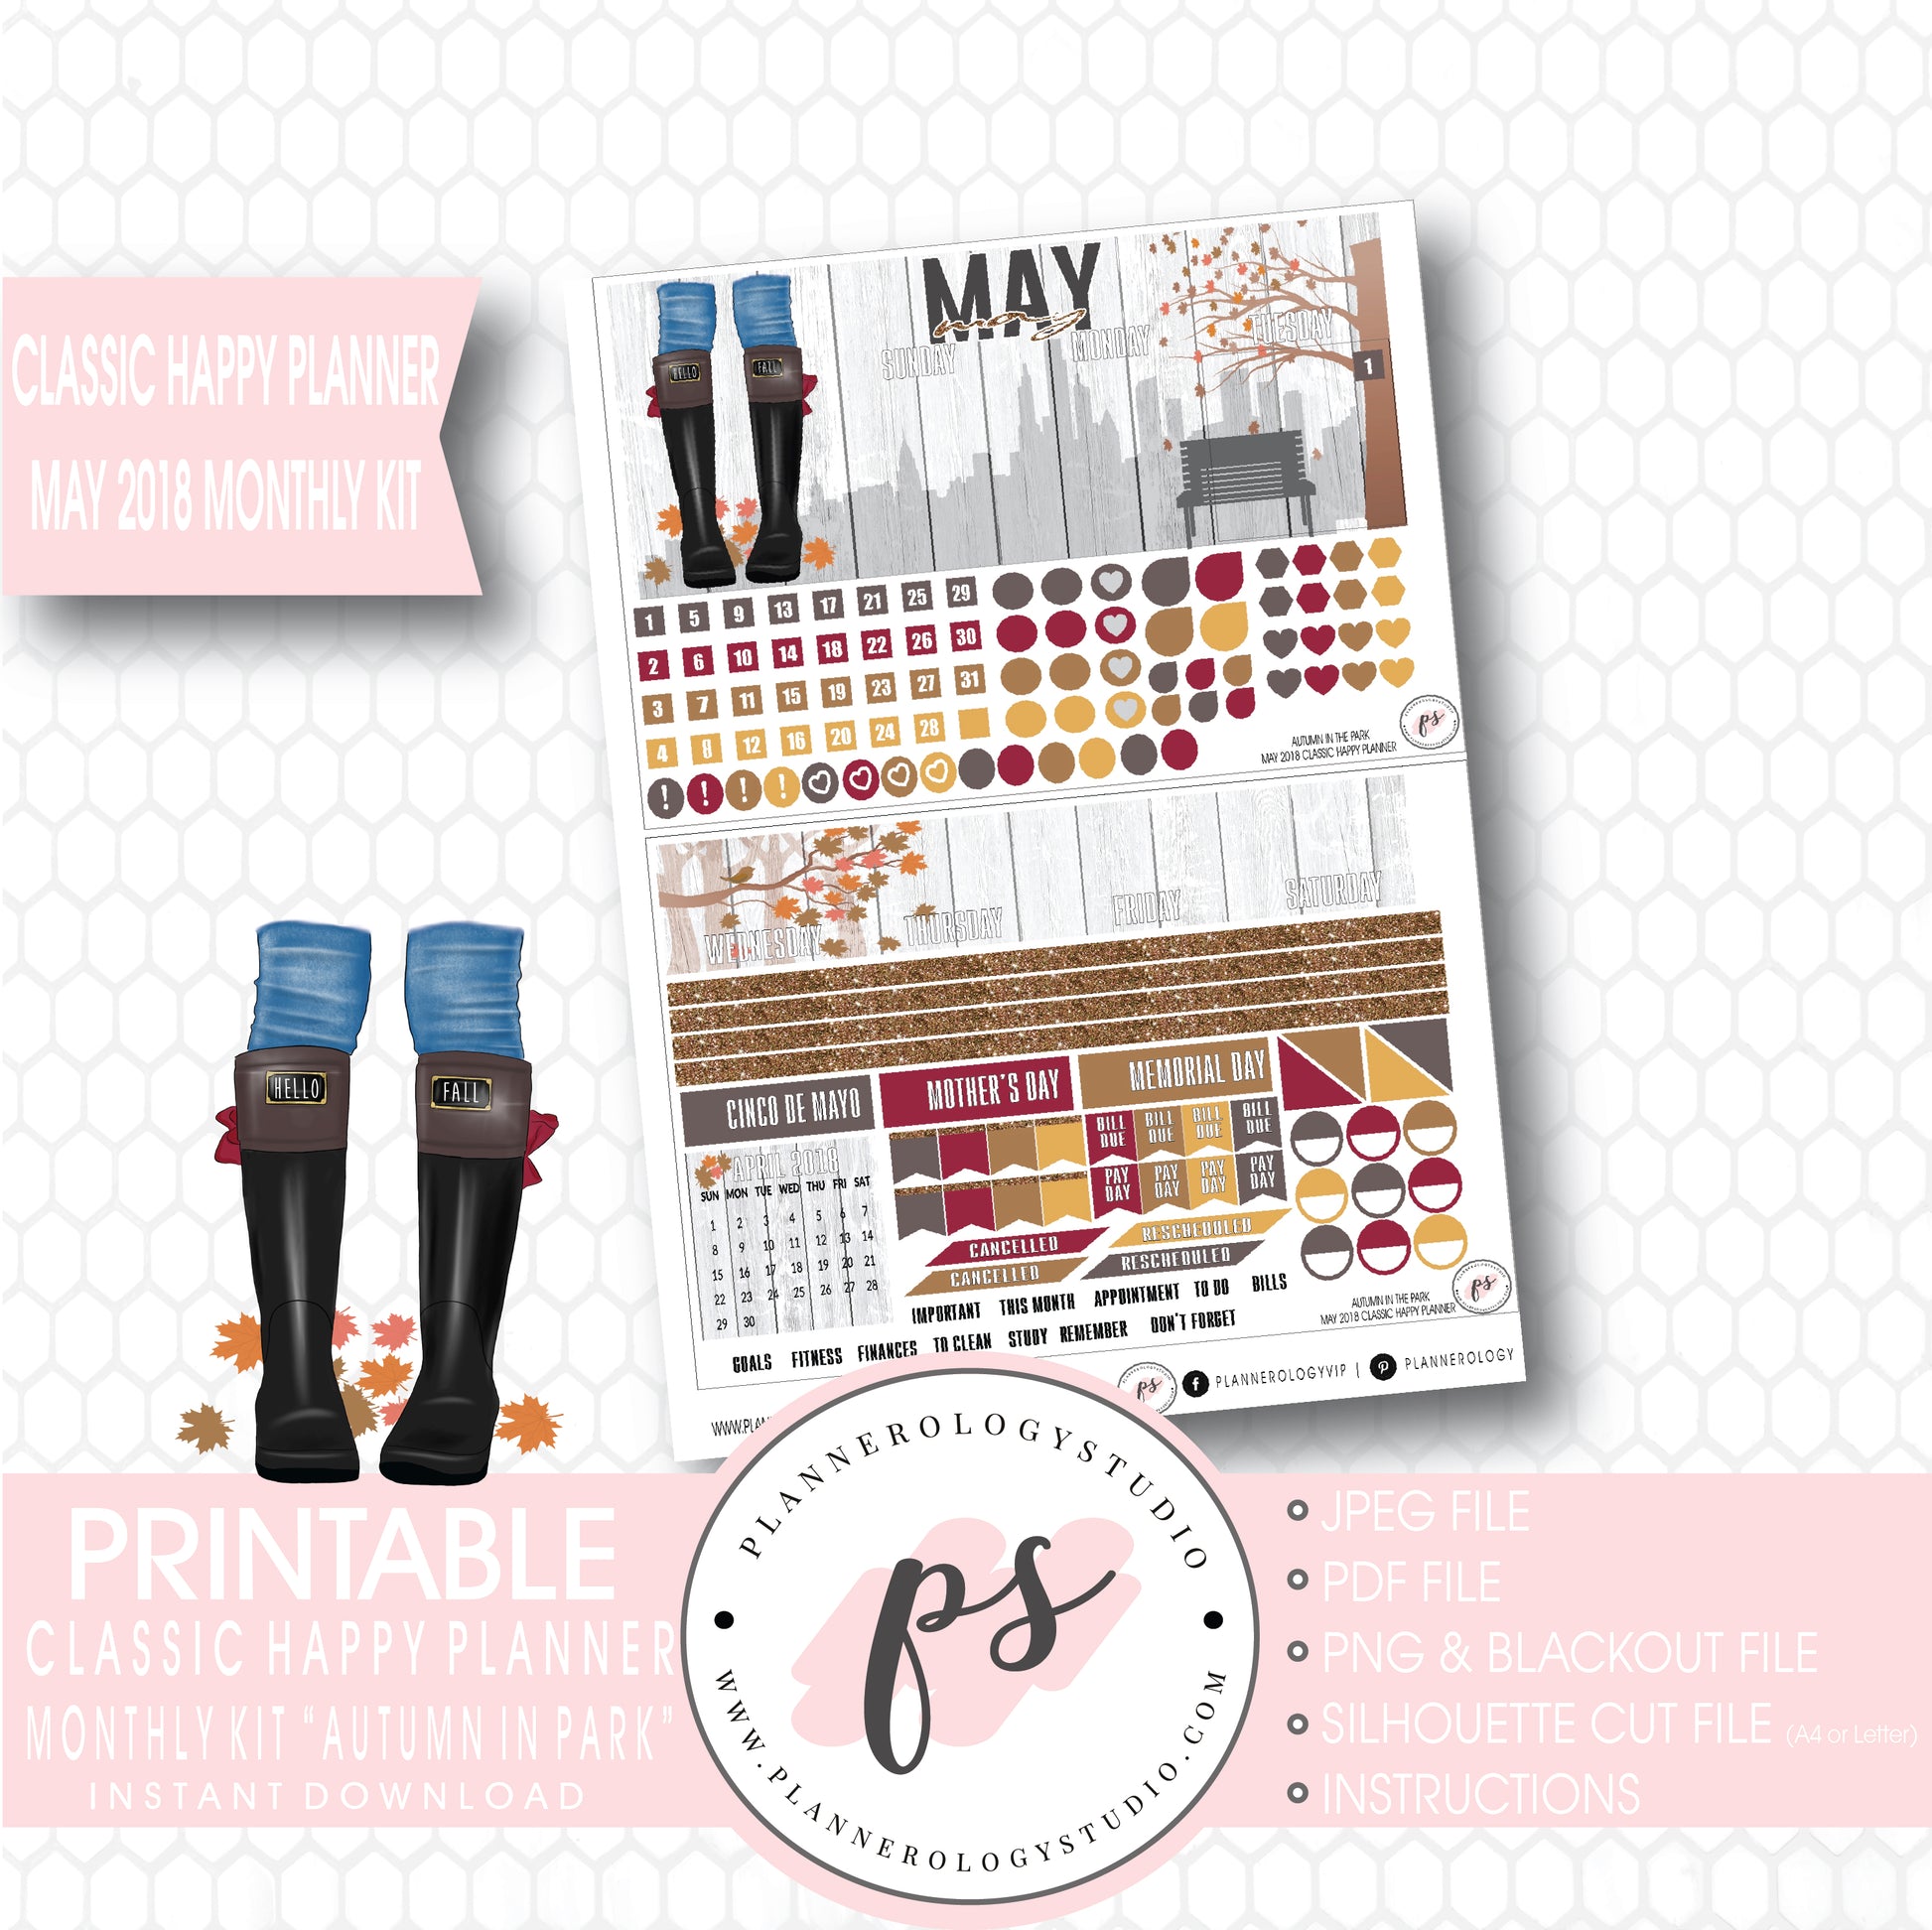 Autumn in the Park May 2018 Monthly View Kit Digital Printable Planner Stickers (for use with Classic Happy Planner) - Plannerologystudio